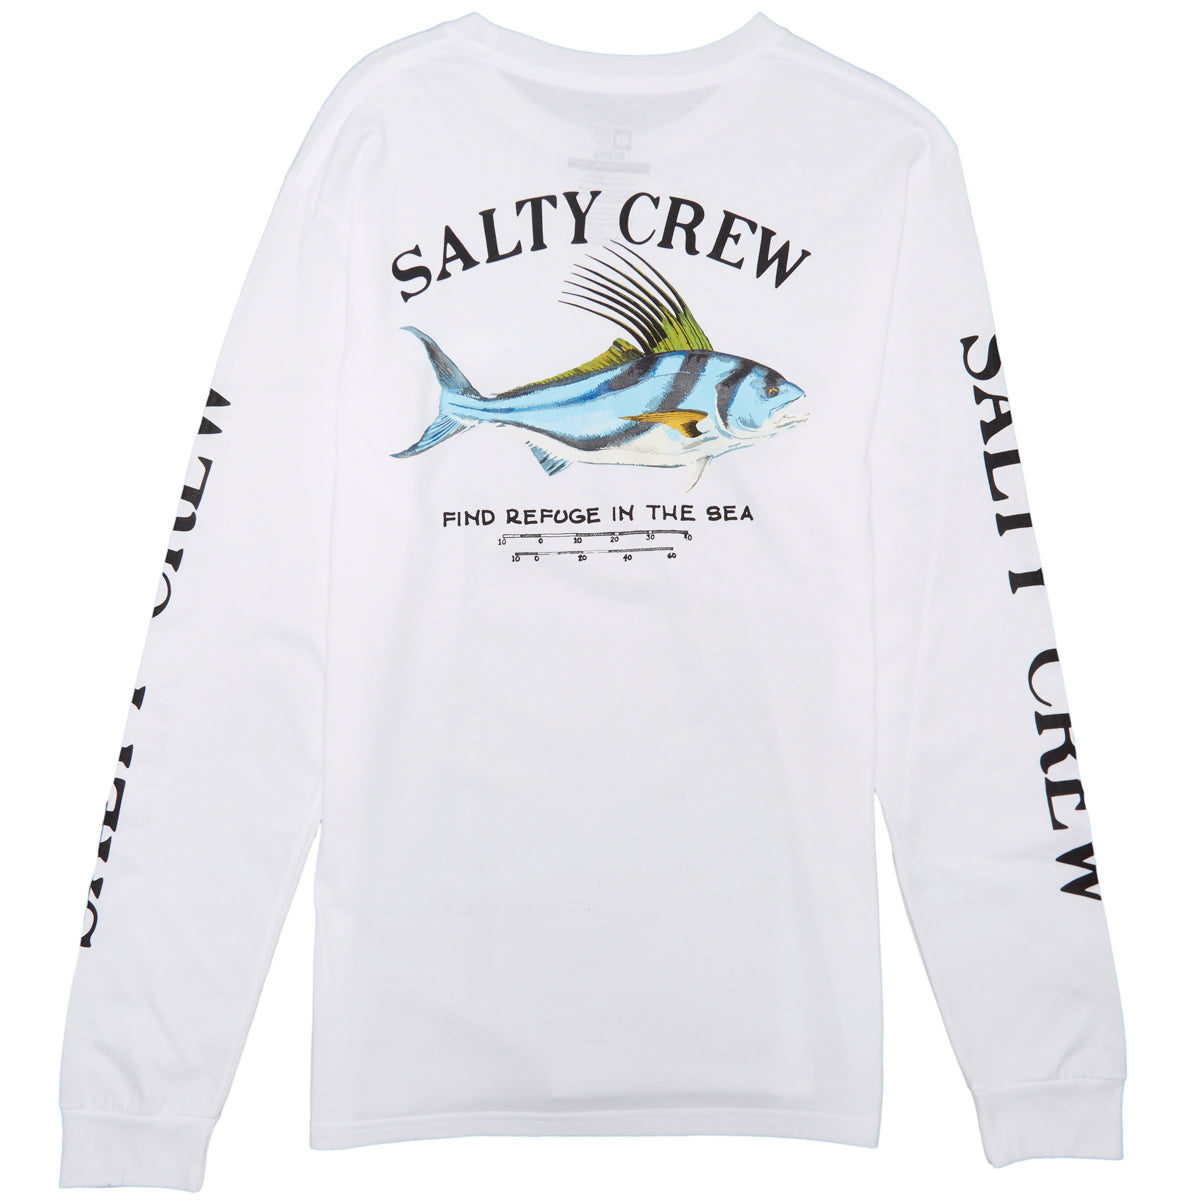 Salty Crew Rooster Premium Long Sleeve T-Shirt - White image 1